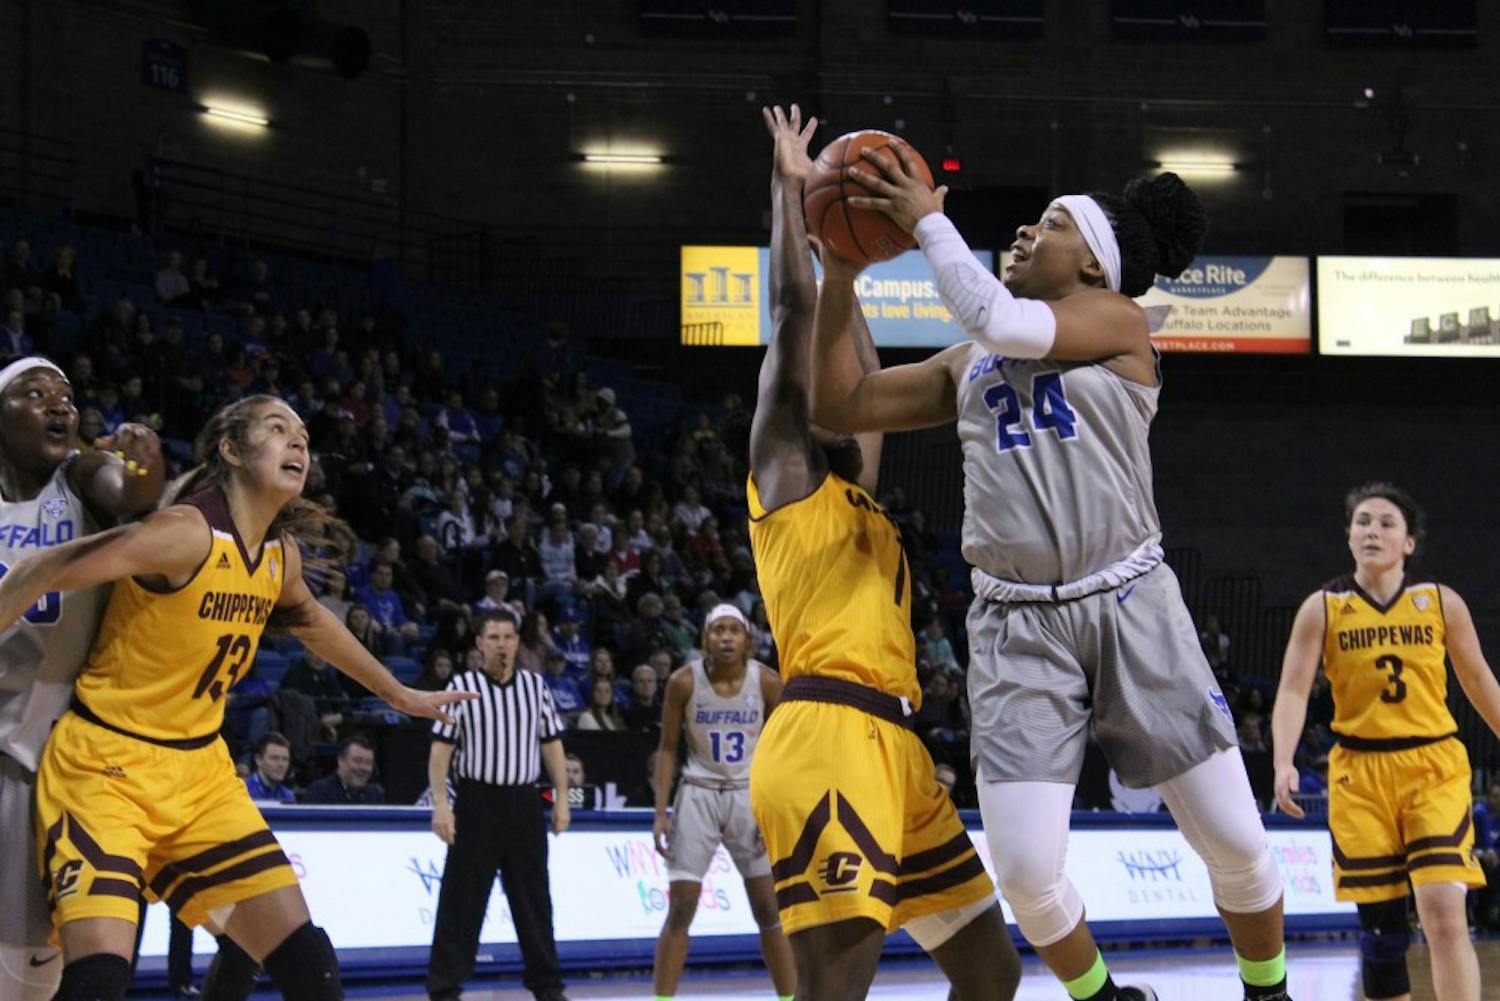 Senior guard Cierra Dillard goes up for a shot. Dillard recorded 31 points and 8 assists during the Bulls’ senior day win against the Miami (OH) RedHawks.